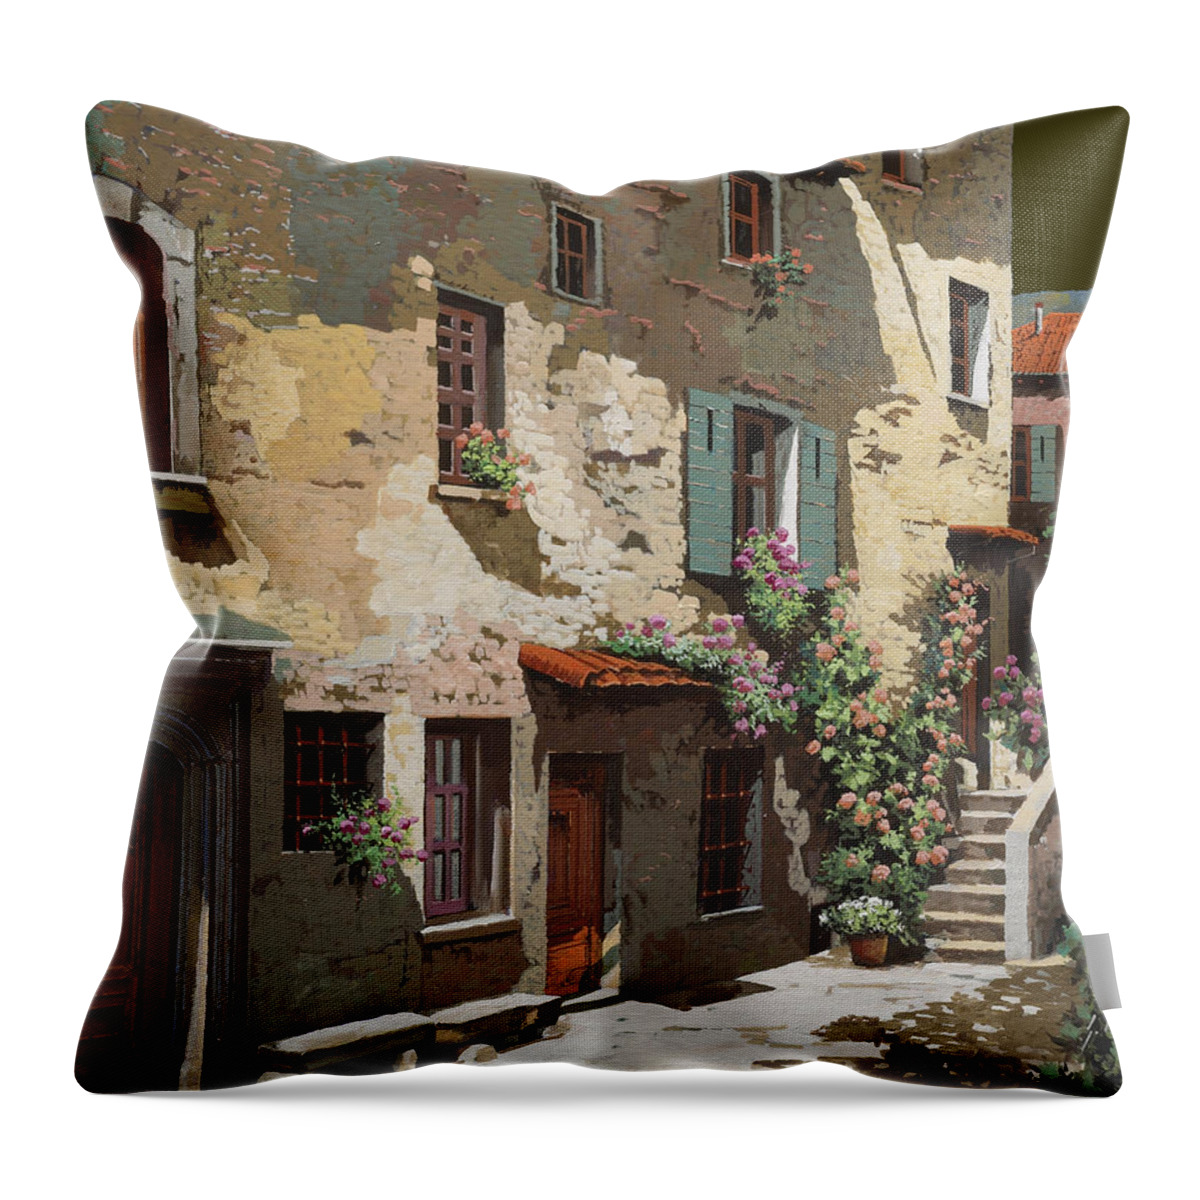 Village Throw Pillow featuring the painting Un Cielo Improbabile by Guido Borelli